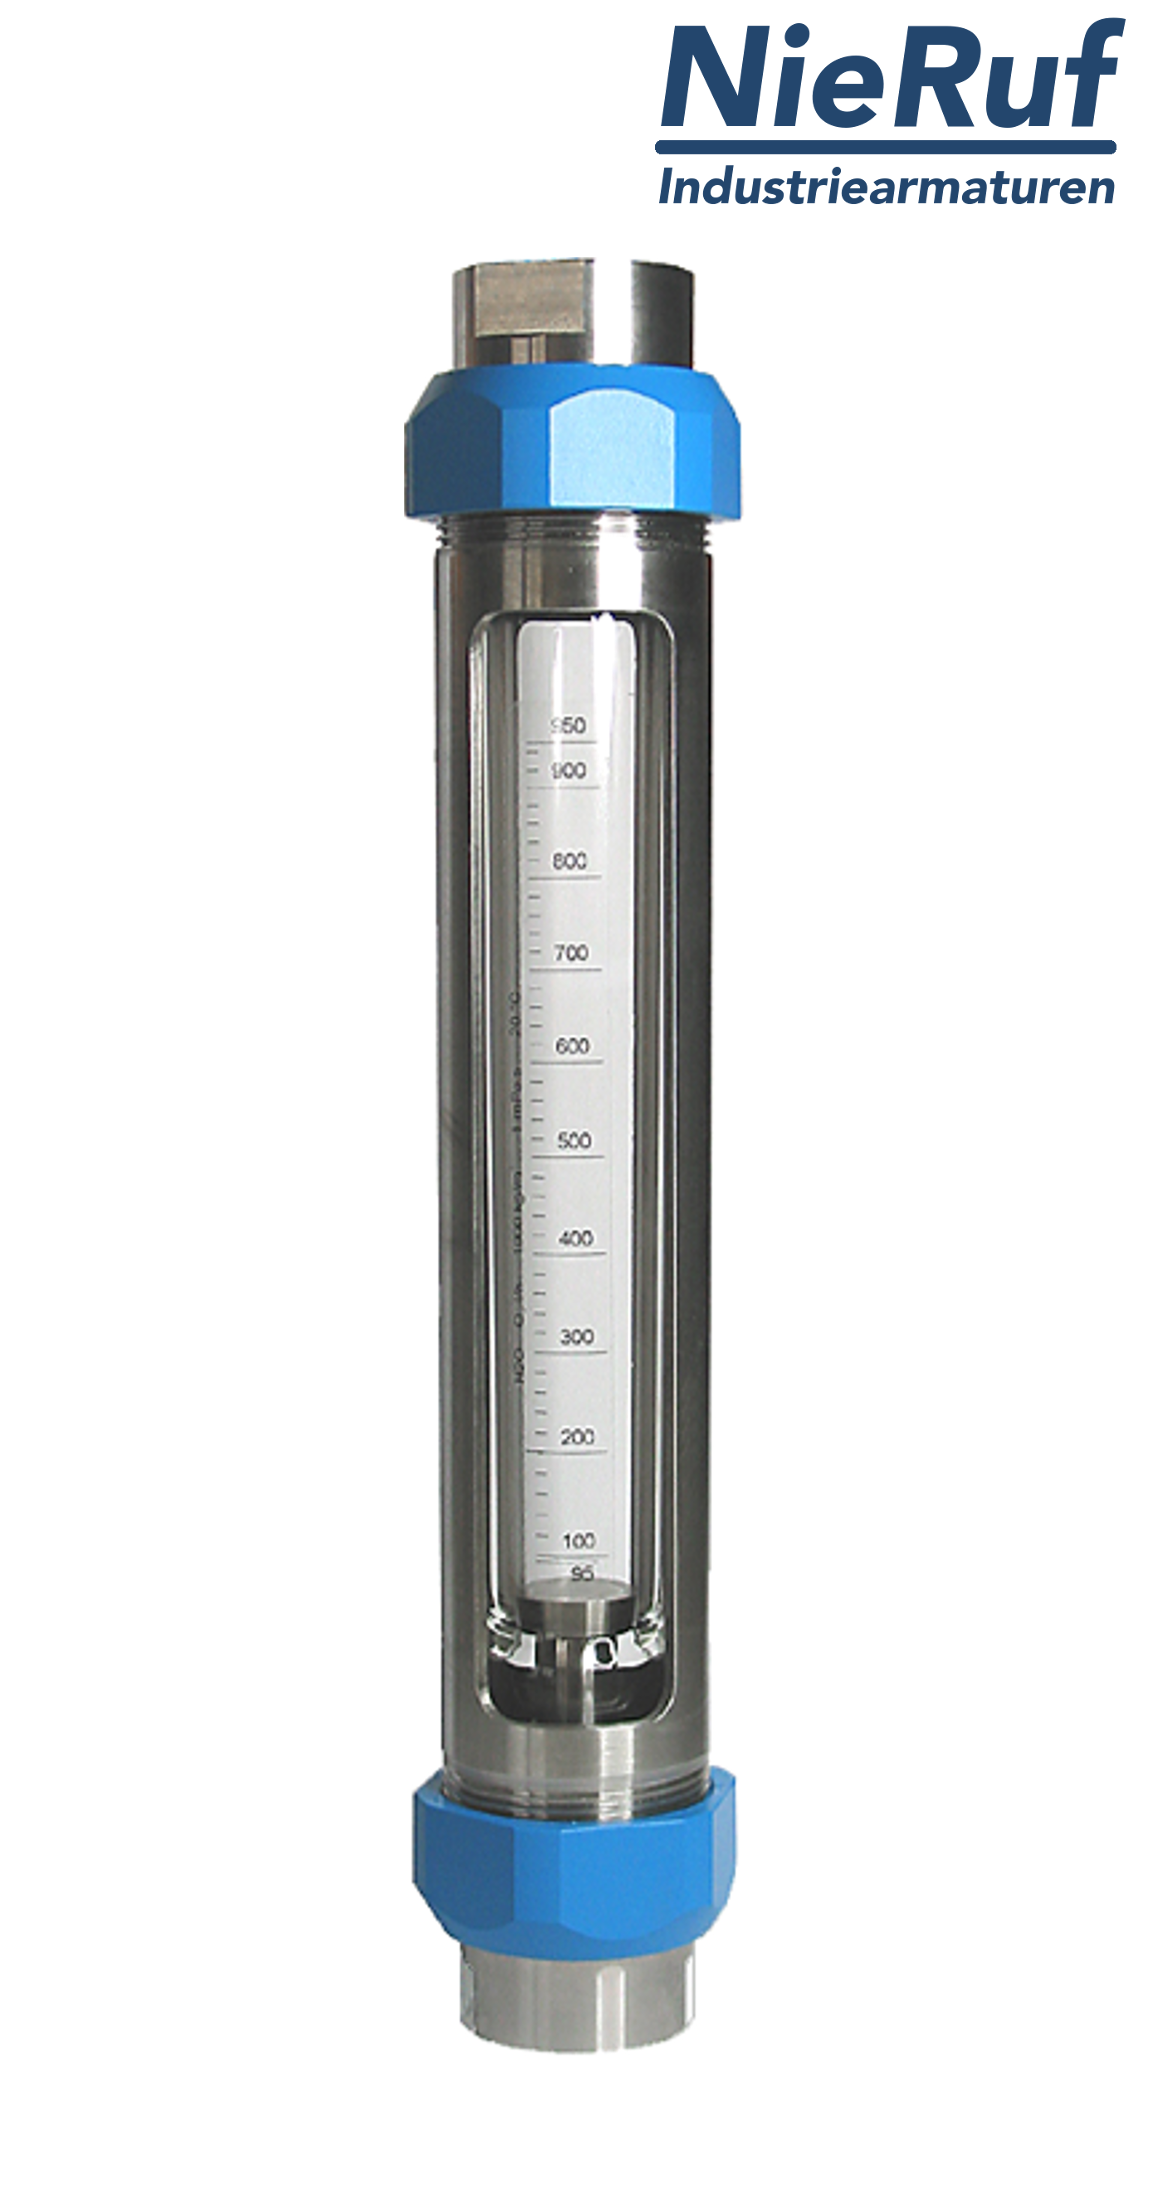 Variable area flowmeter stainless steel + borosilicate 1/2" inch 100.0 - 1000 l/h water FKM